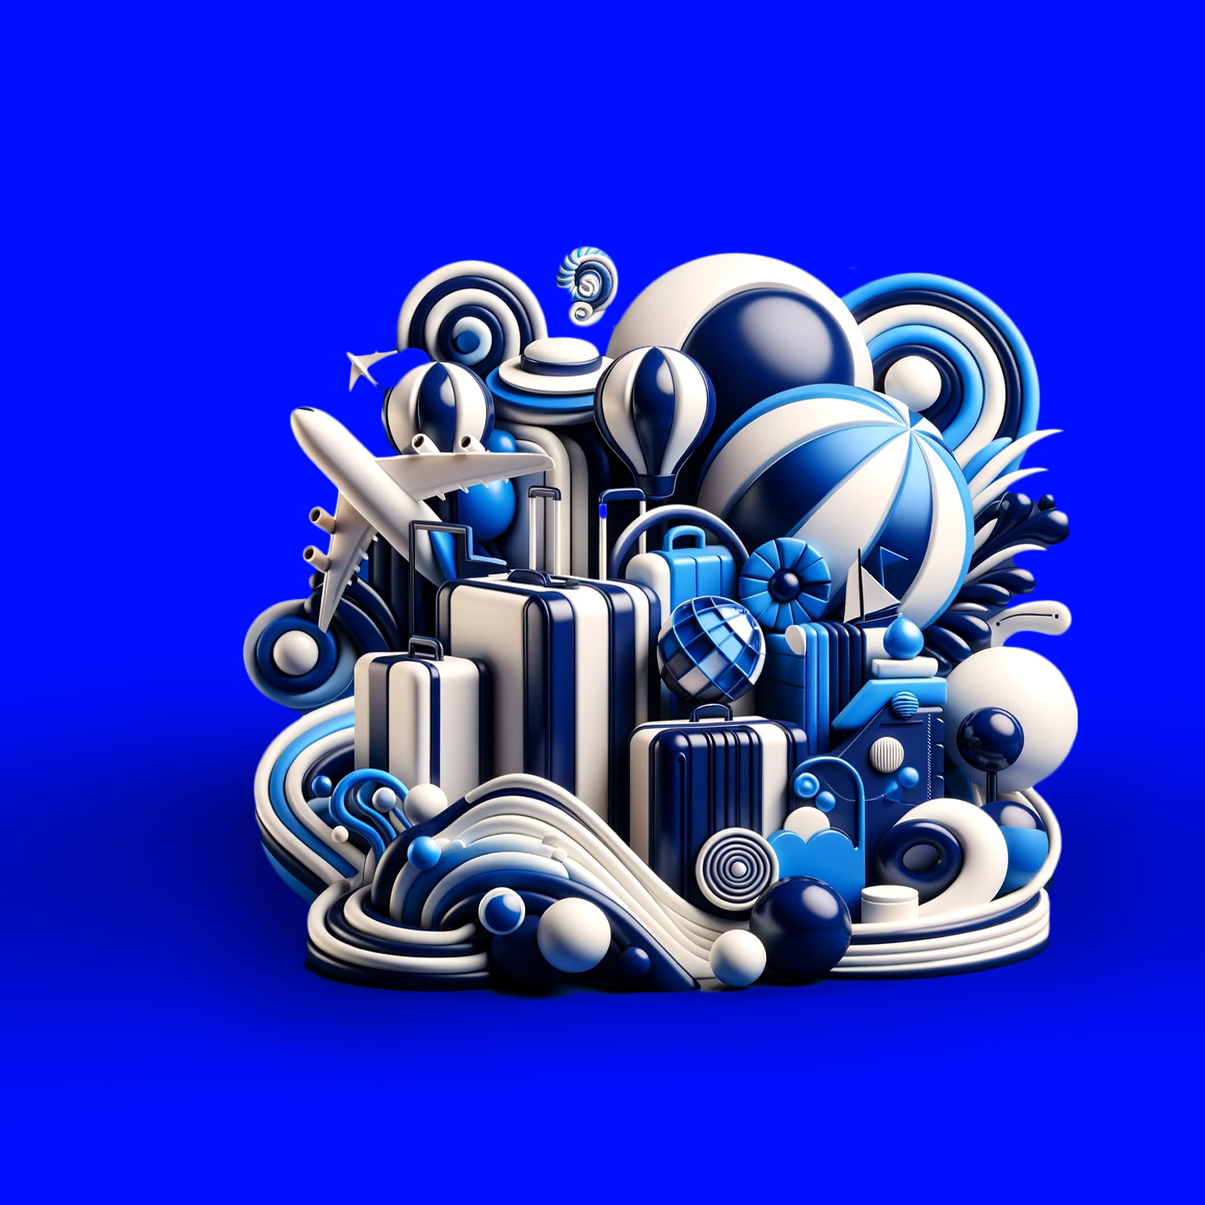 An abstract composition of 3D shapes and objects in various shades of blue, creating a playful and intricate visual ensemble against a monochromatic background